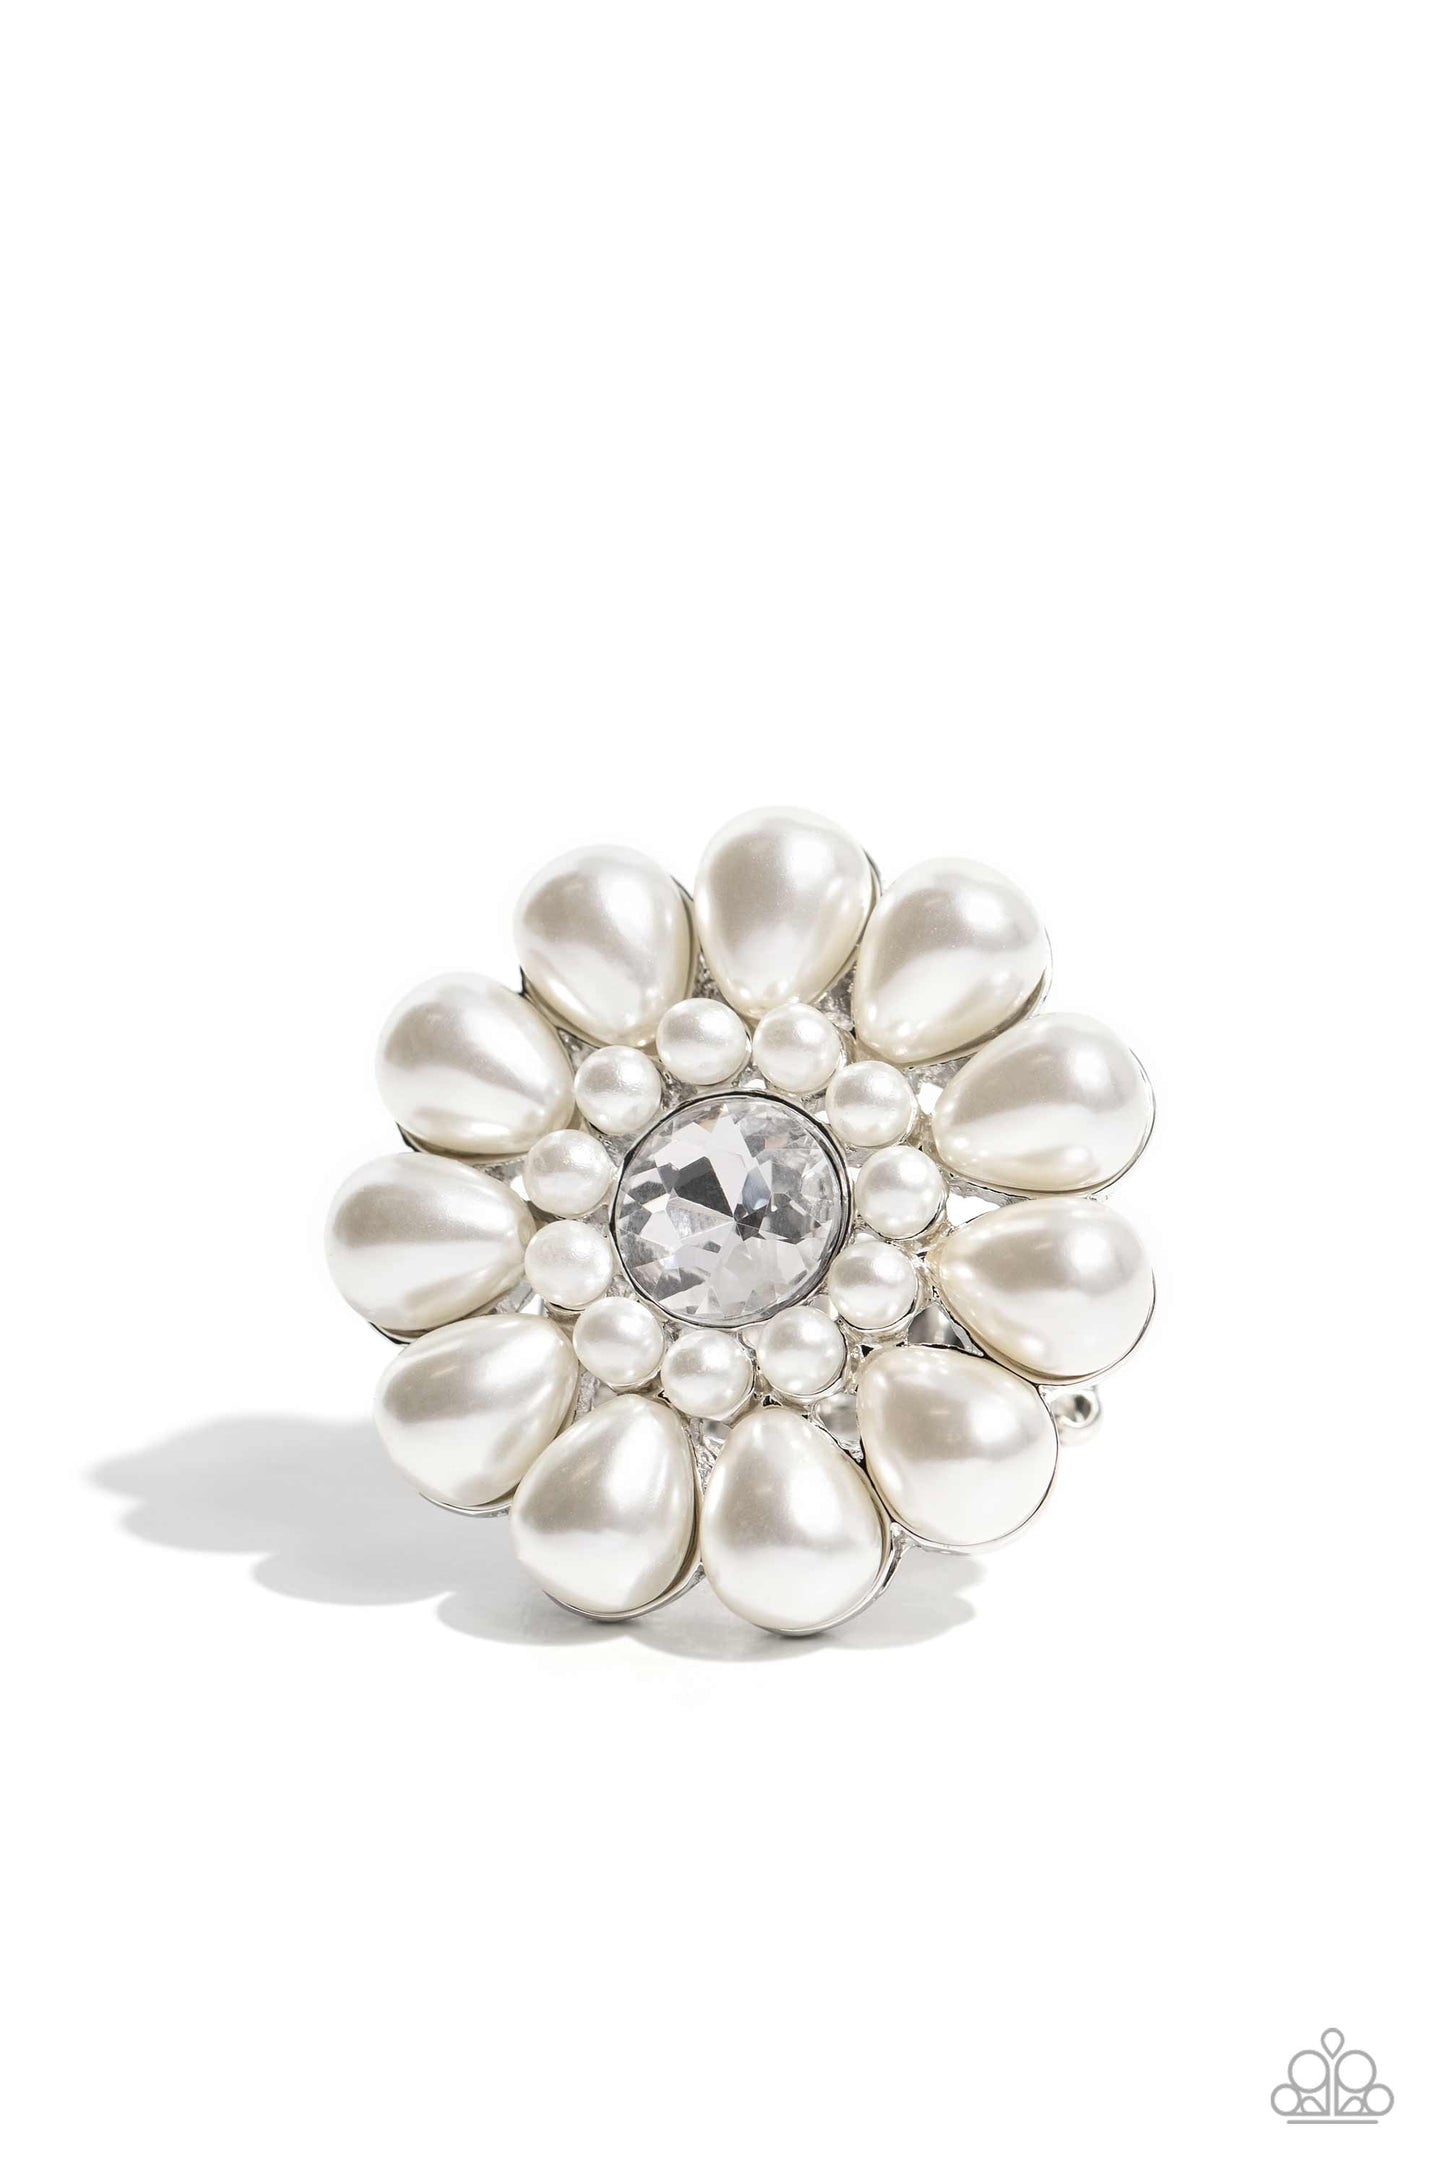 PEARL Talk - White Pearl - Silver Ring - Paparazzi Accessories - Featuring a glassy white gem center, bubbly oversized pearl petals fan out from dainty pearl settings atop the finger on airy silver bands for a sophisticated floral fashion ring.